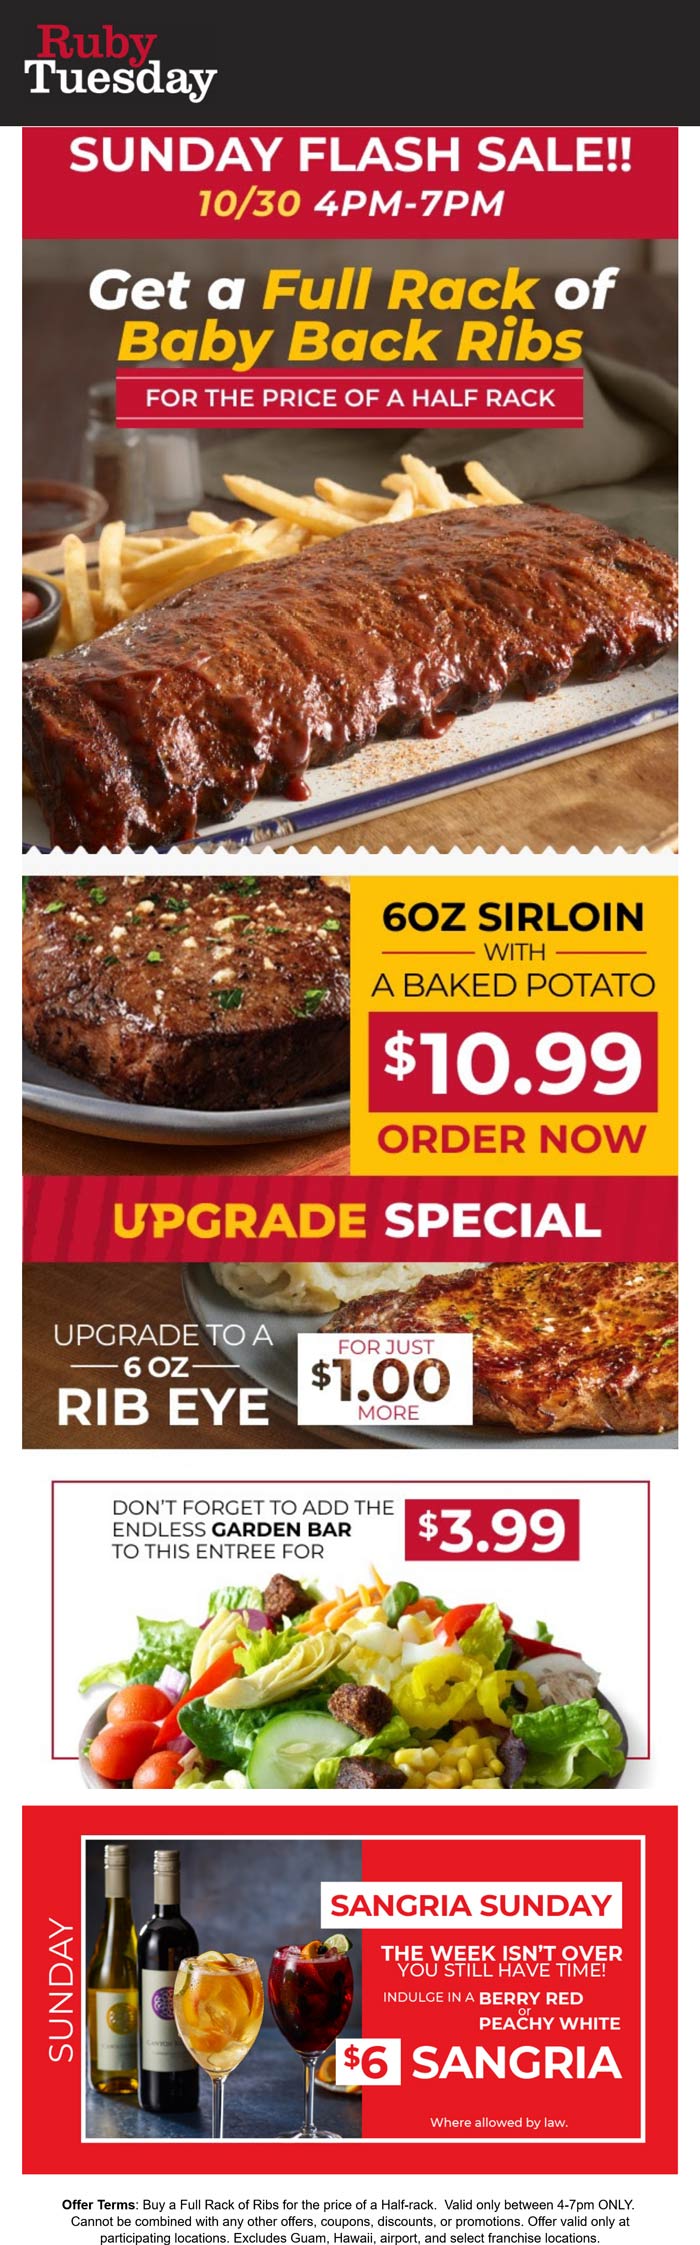 Ruby Tuesday restaurants Coupon  Second half rack ribs free & steak + potato for $11 4-7p today at Ruby Tuesday #rubytuesday 